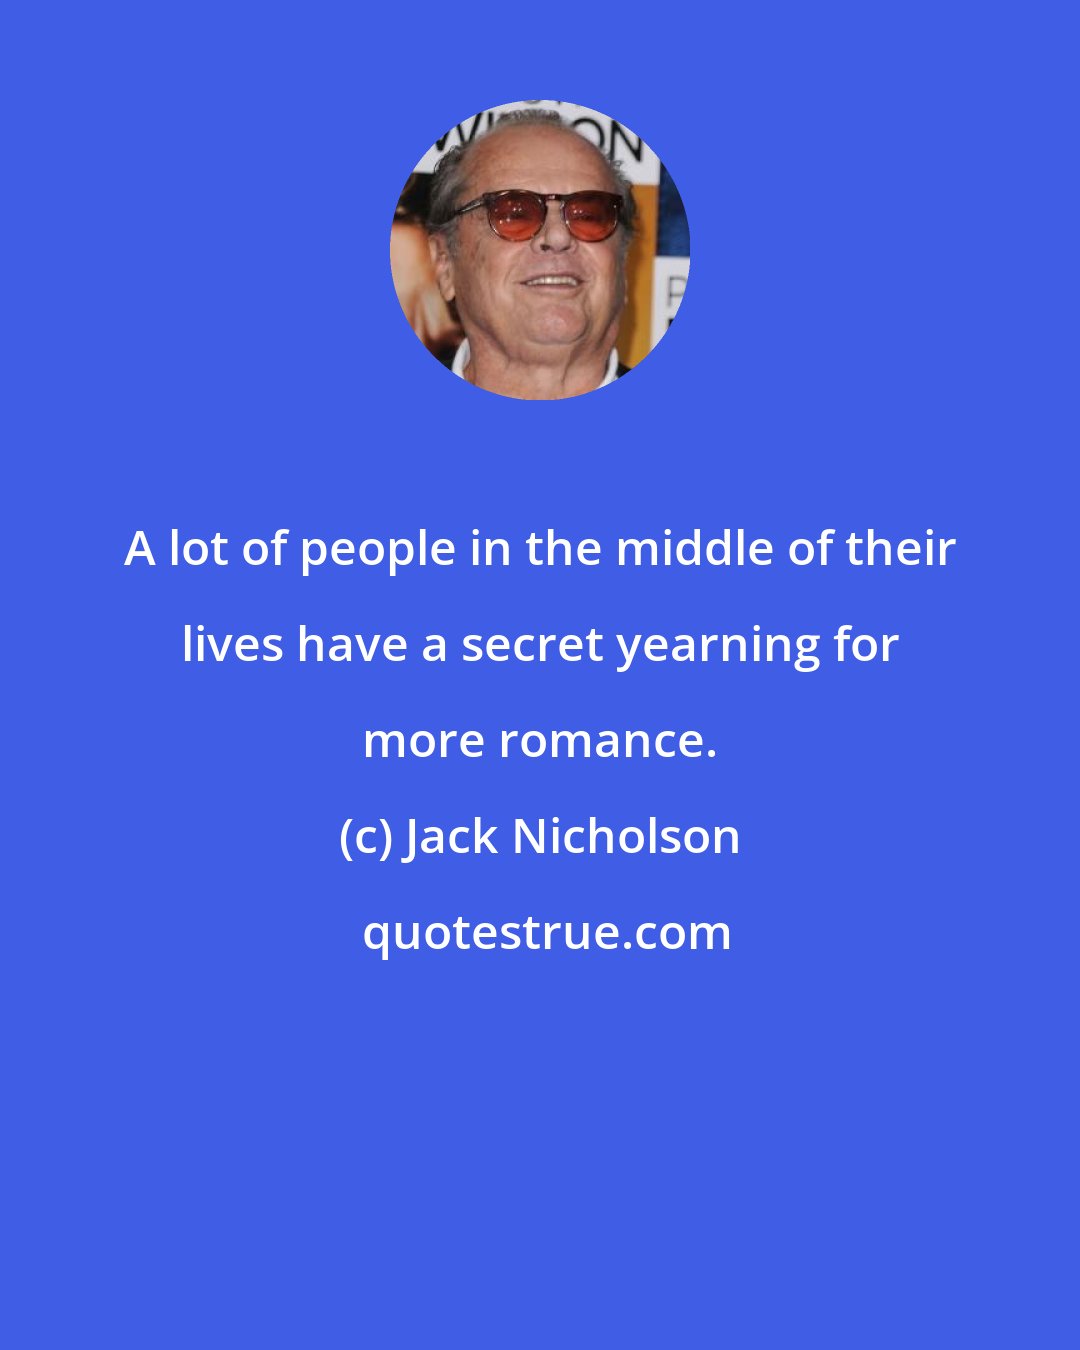 Jack Nicholson: A lot of people in the middle of their lives have a secret yearning for more romance.